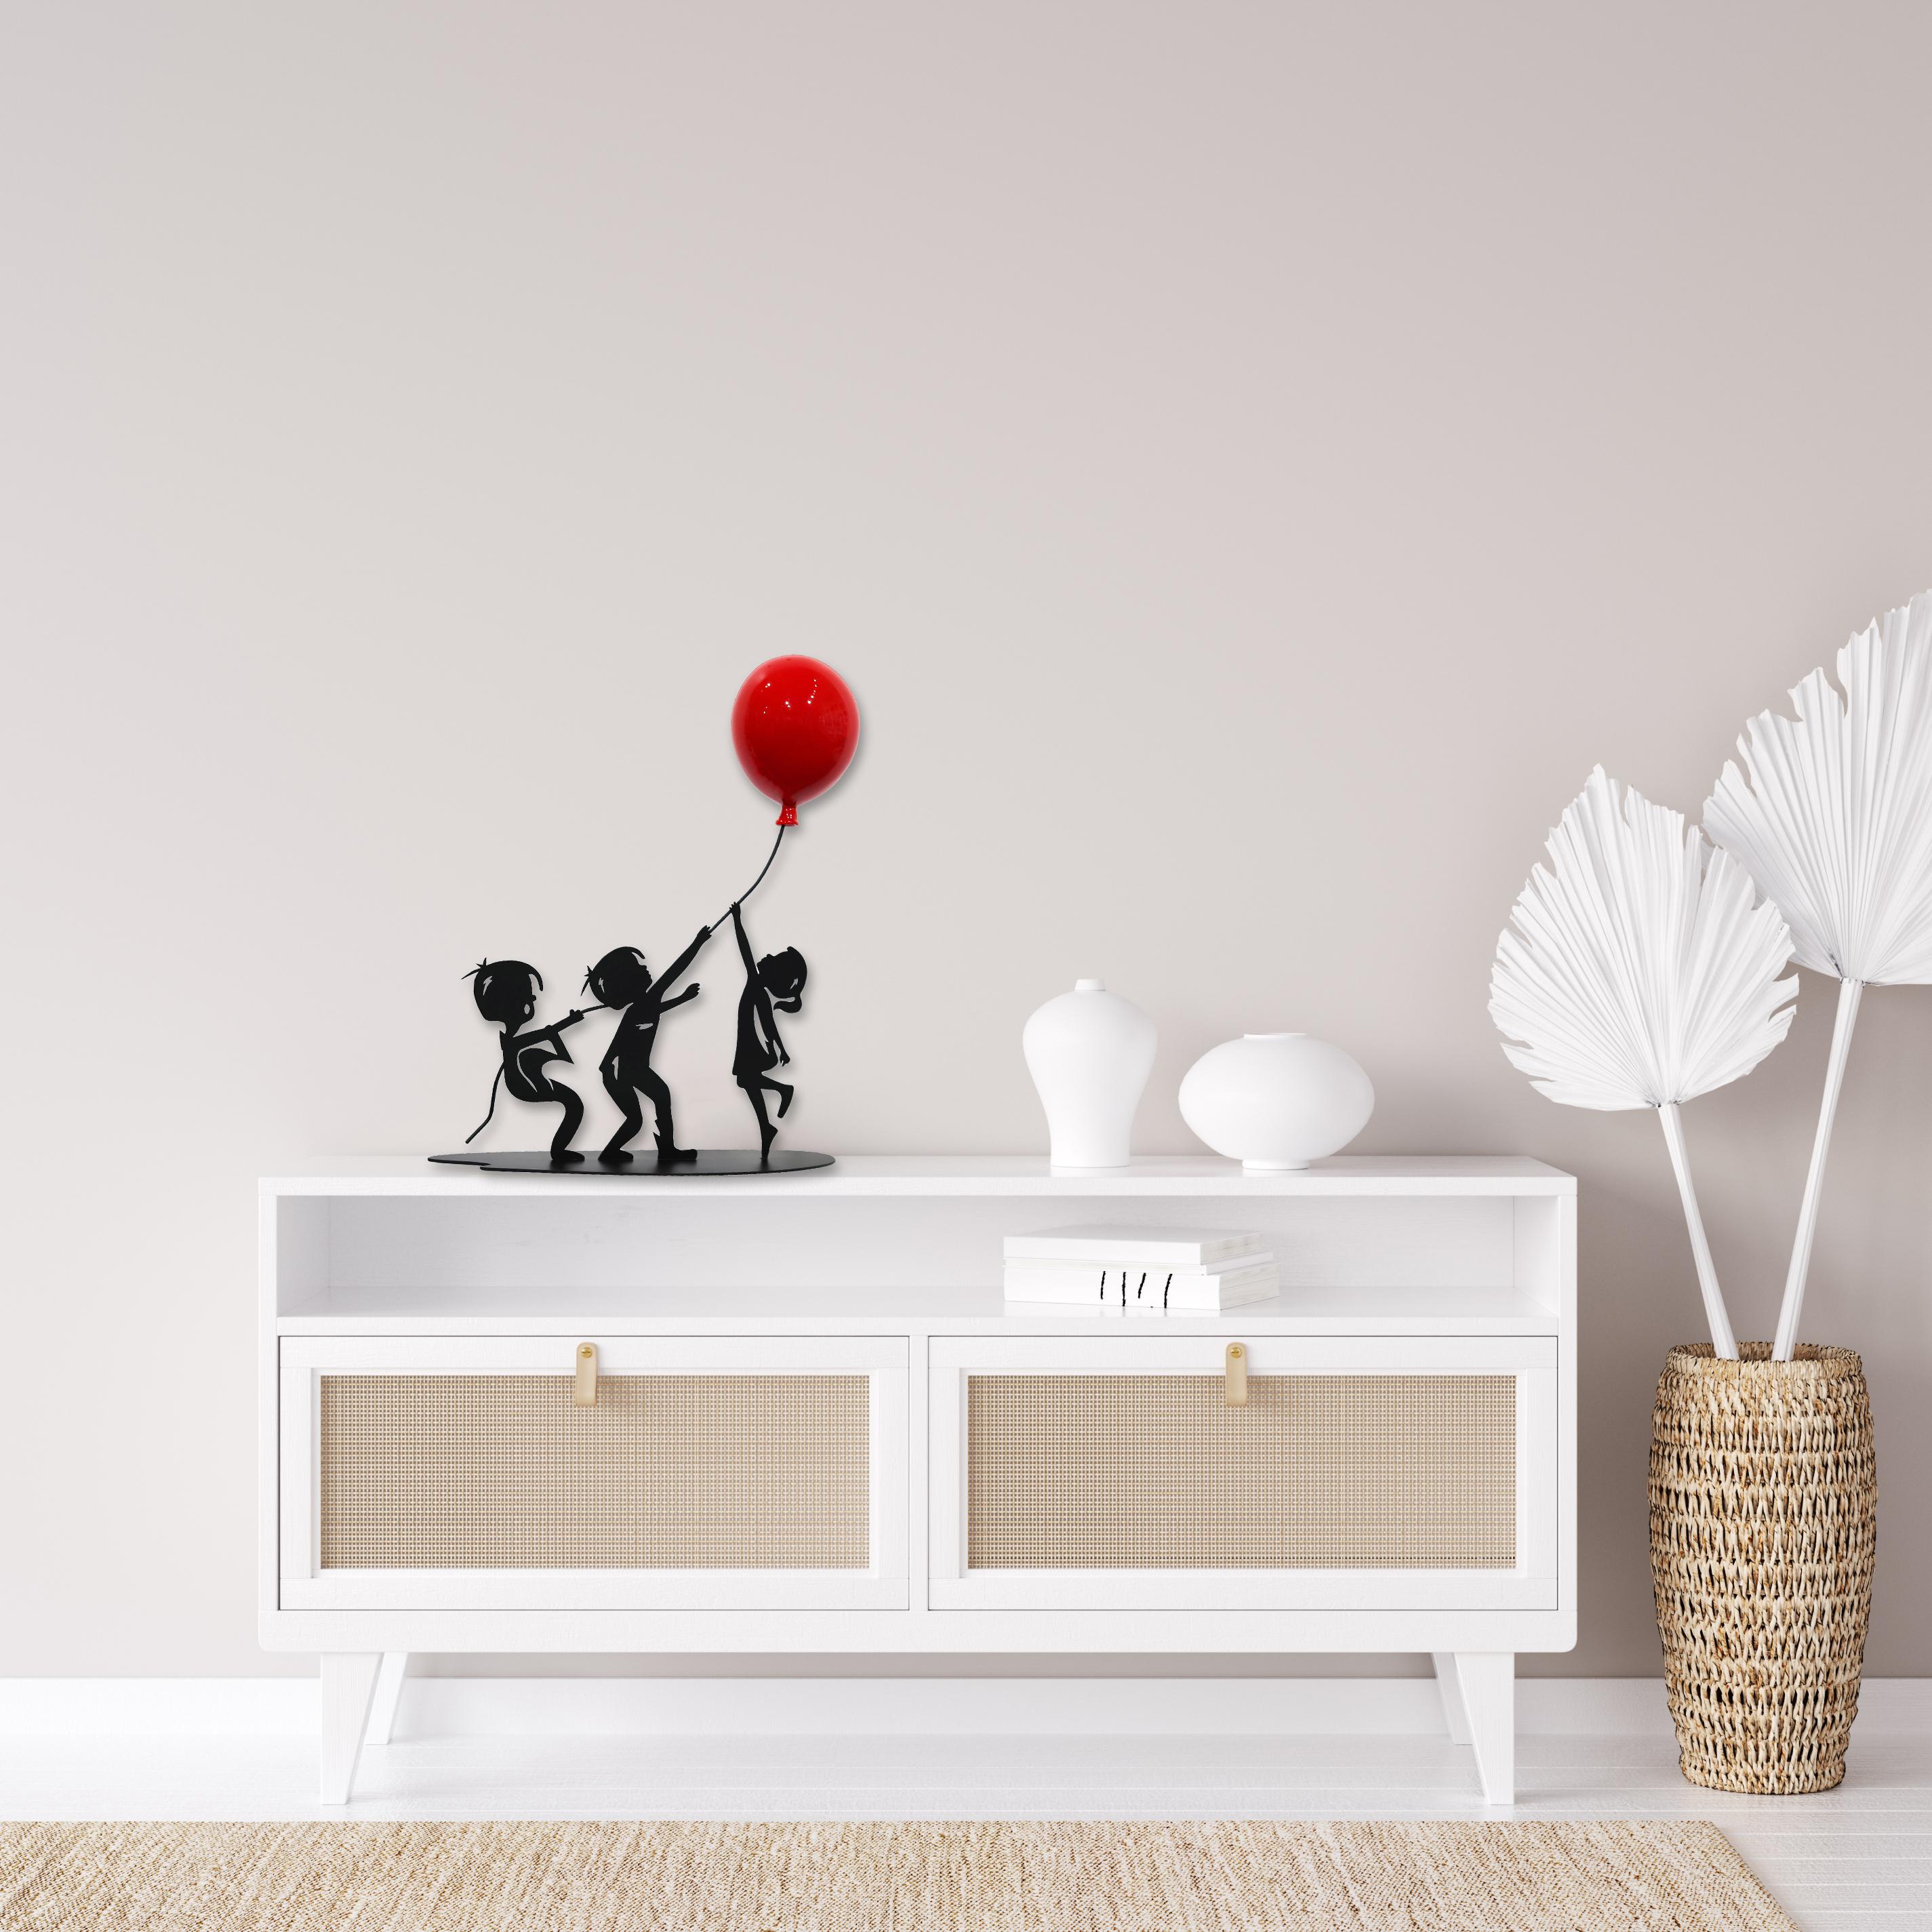 Big Dreams - Figurative Steel Sculpture with Glossy Red Balloon For Sale 3